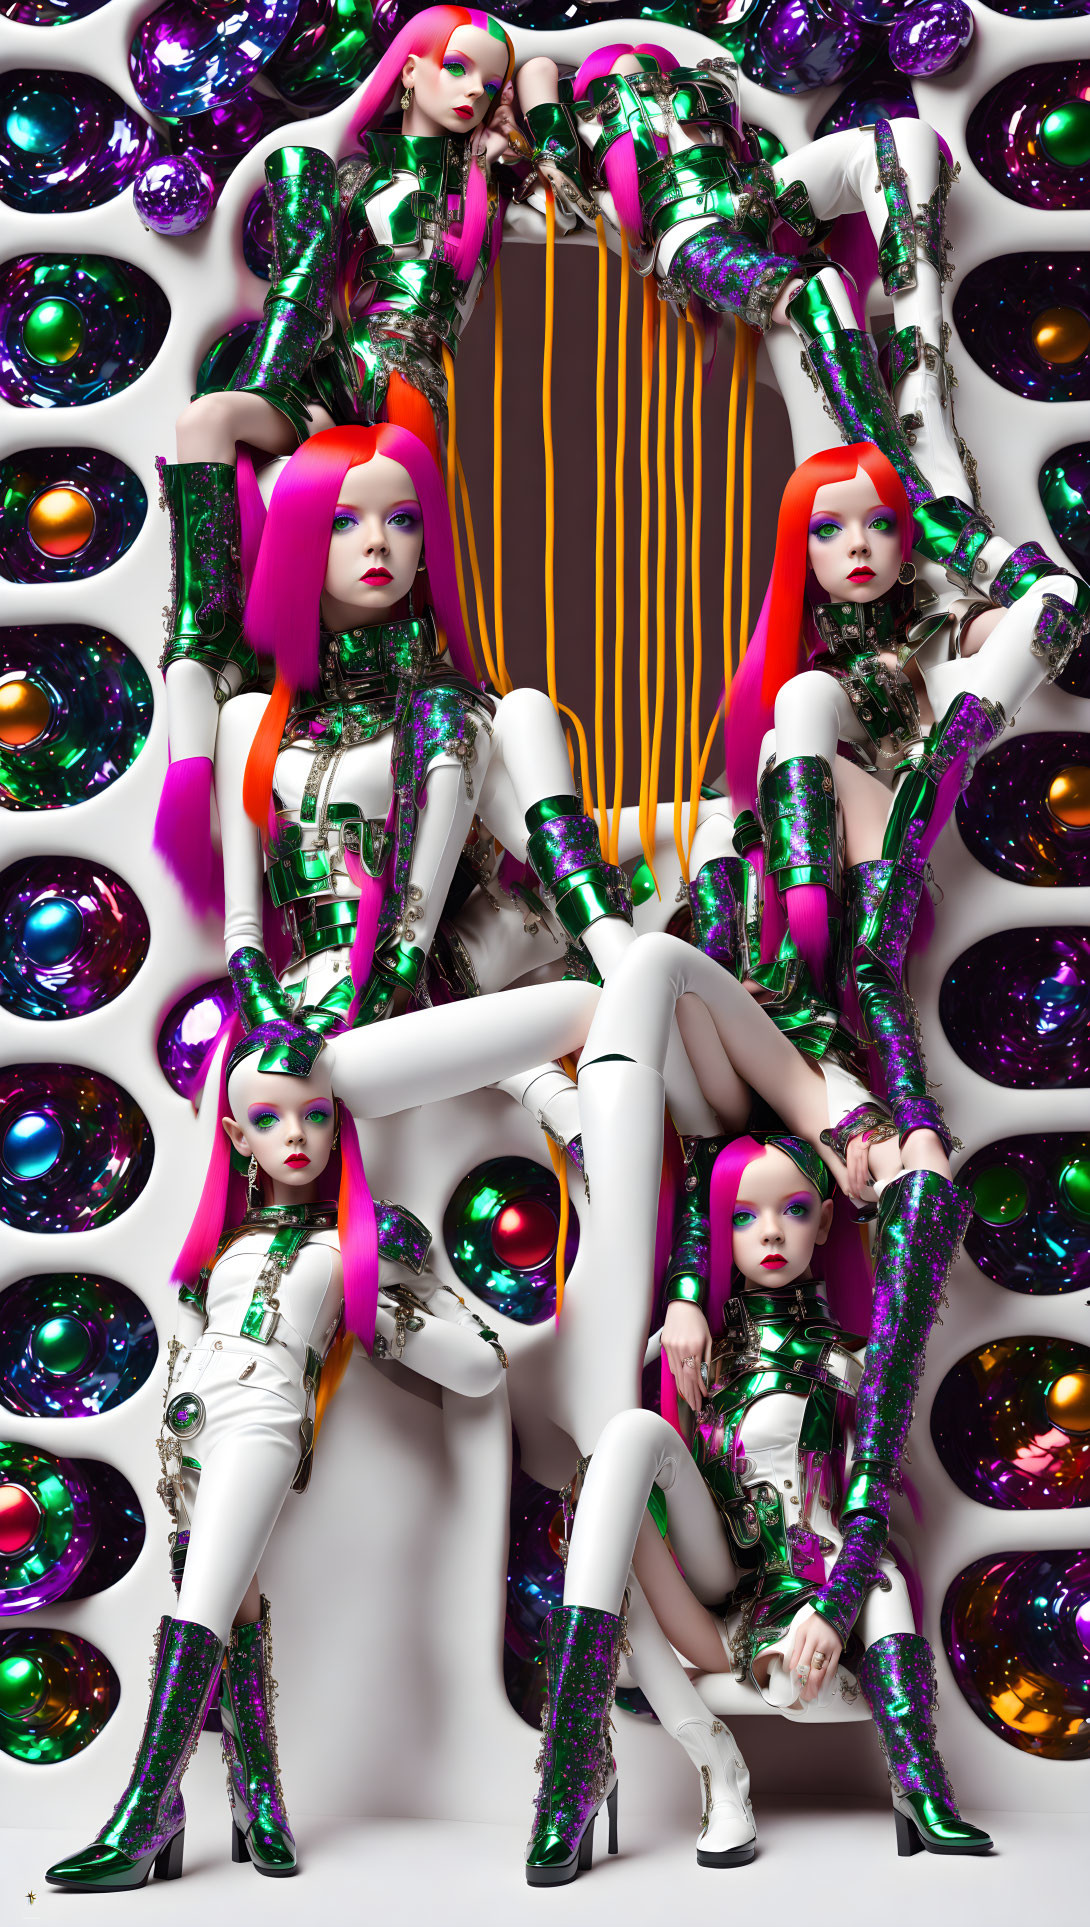 Four Female Models in Pink Hair & Futuristic Outfits with Reflective Orbs